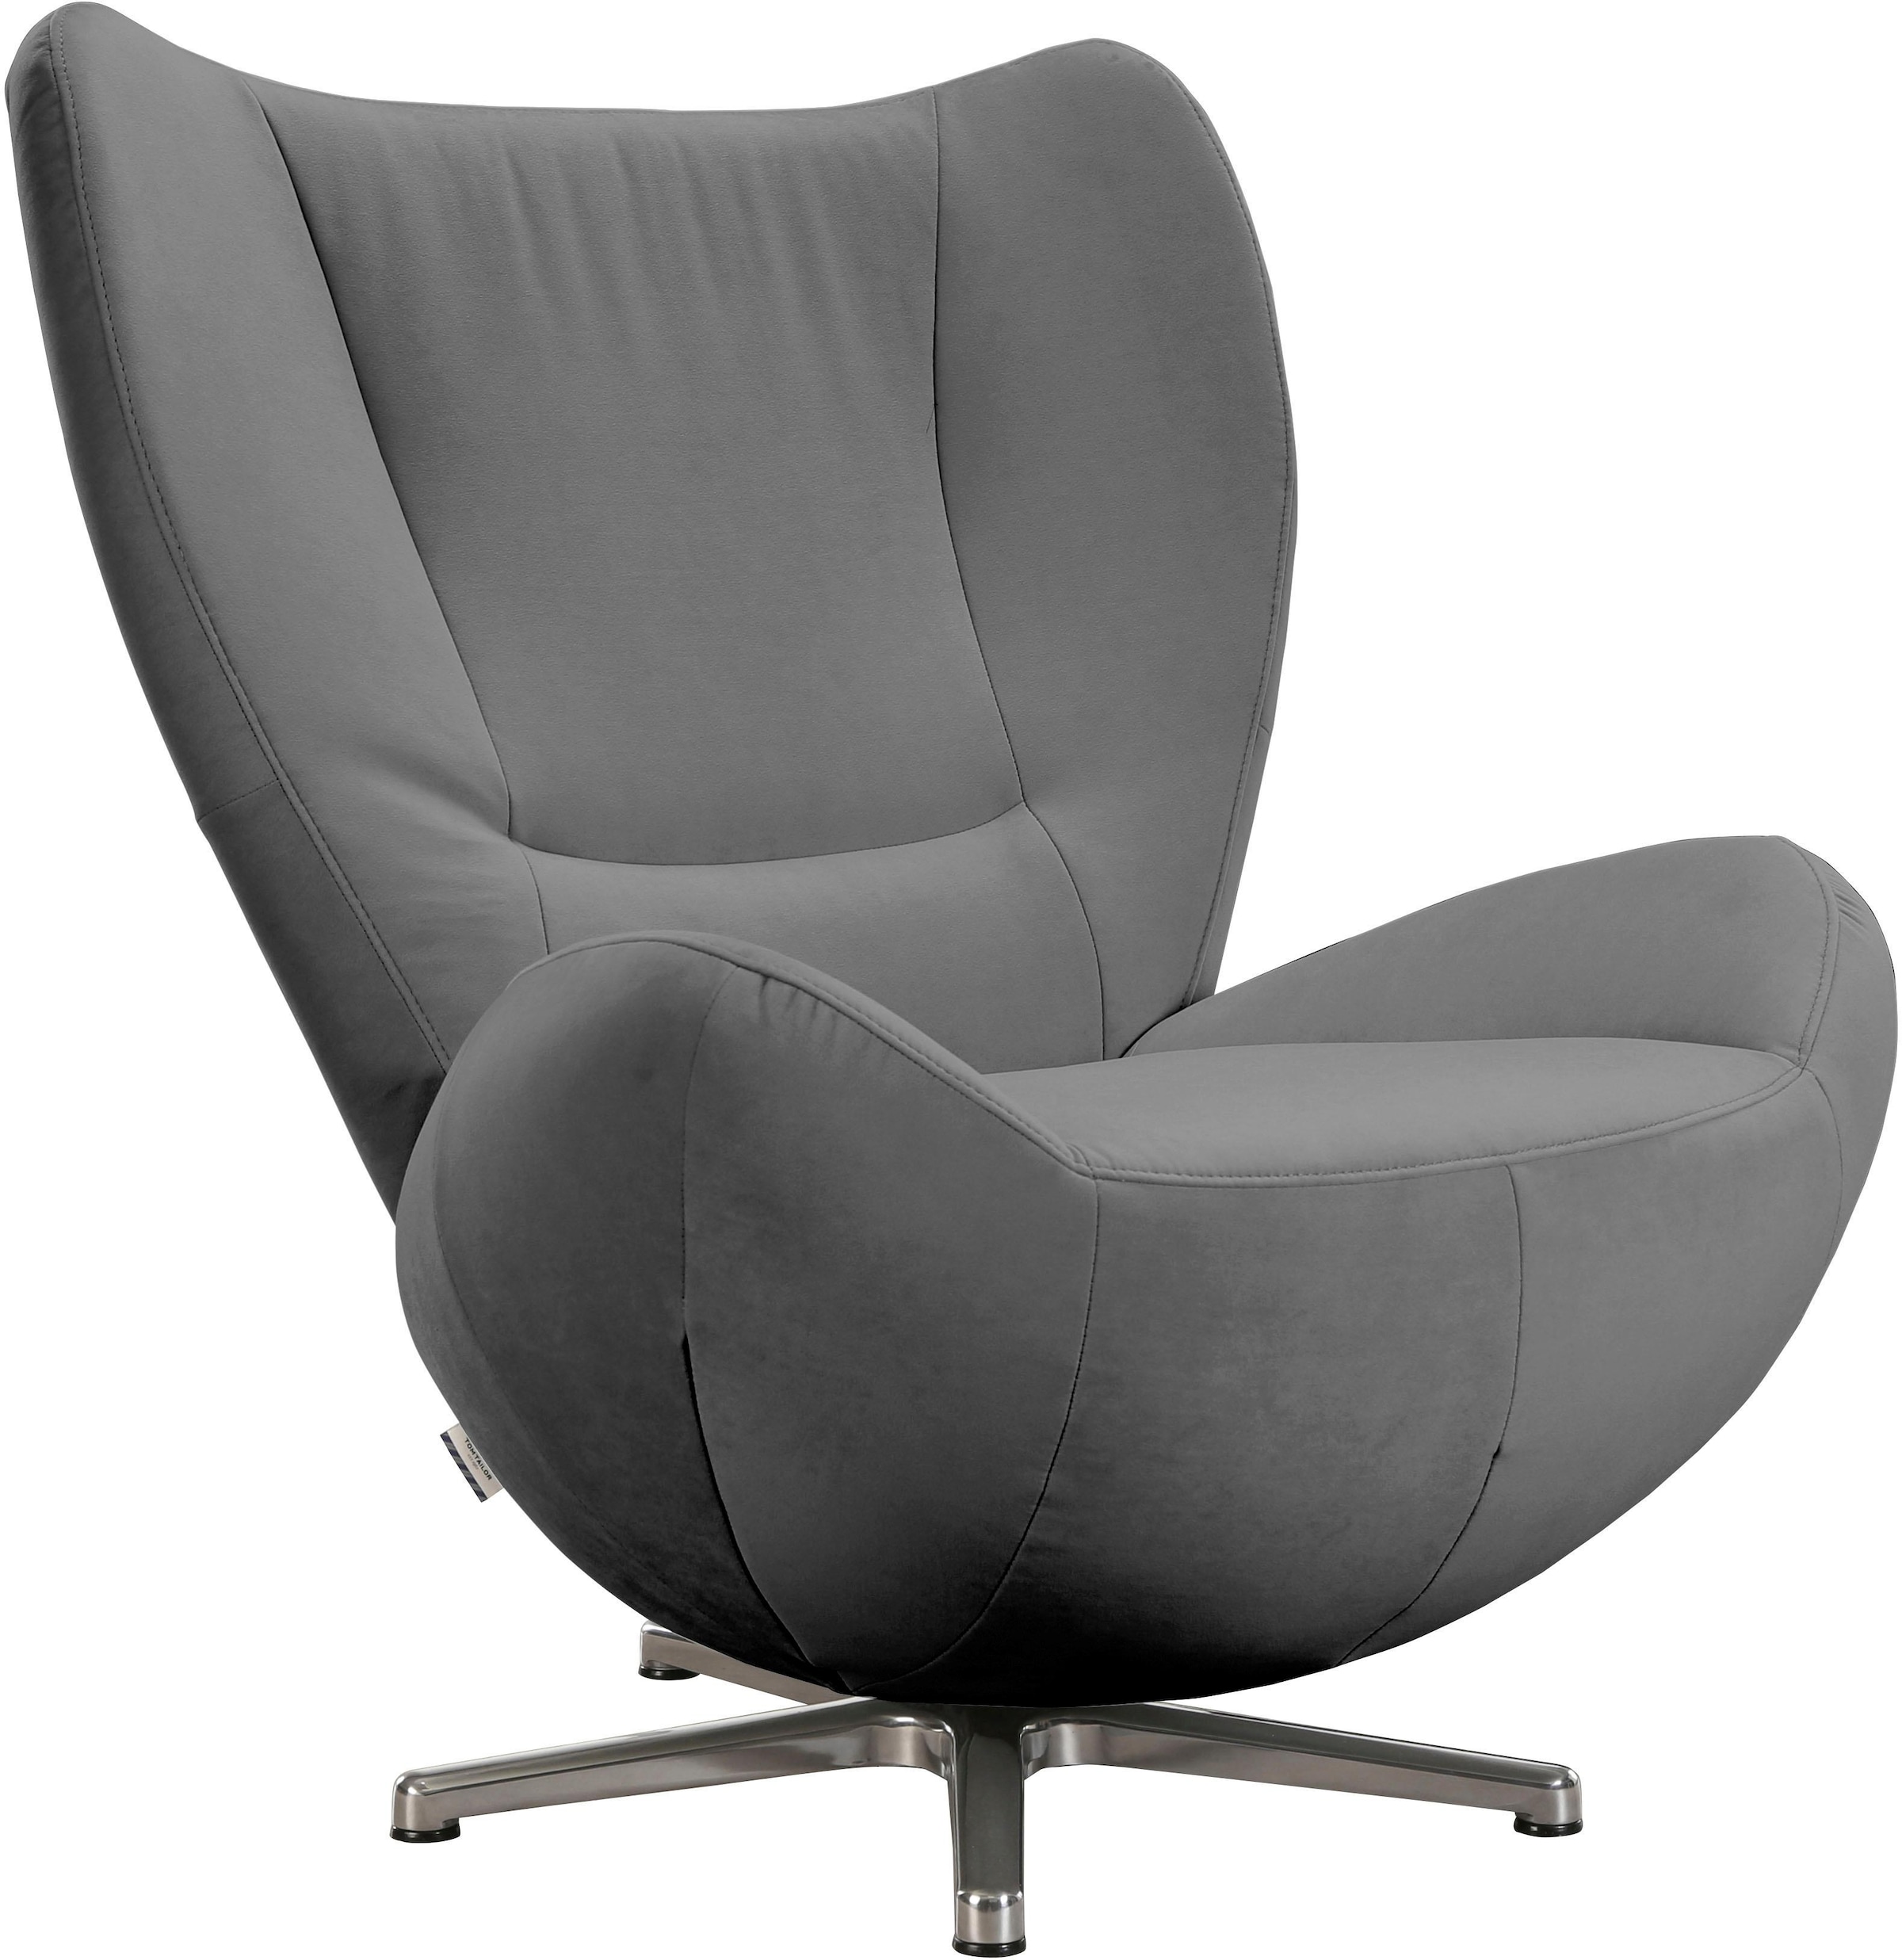 TOM TAILOR HOME Loungesessel Chrom BAUR mit »TOM Metall-Drehfuß | PURE«, in